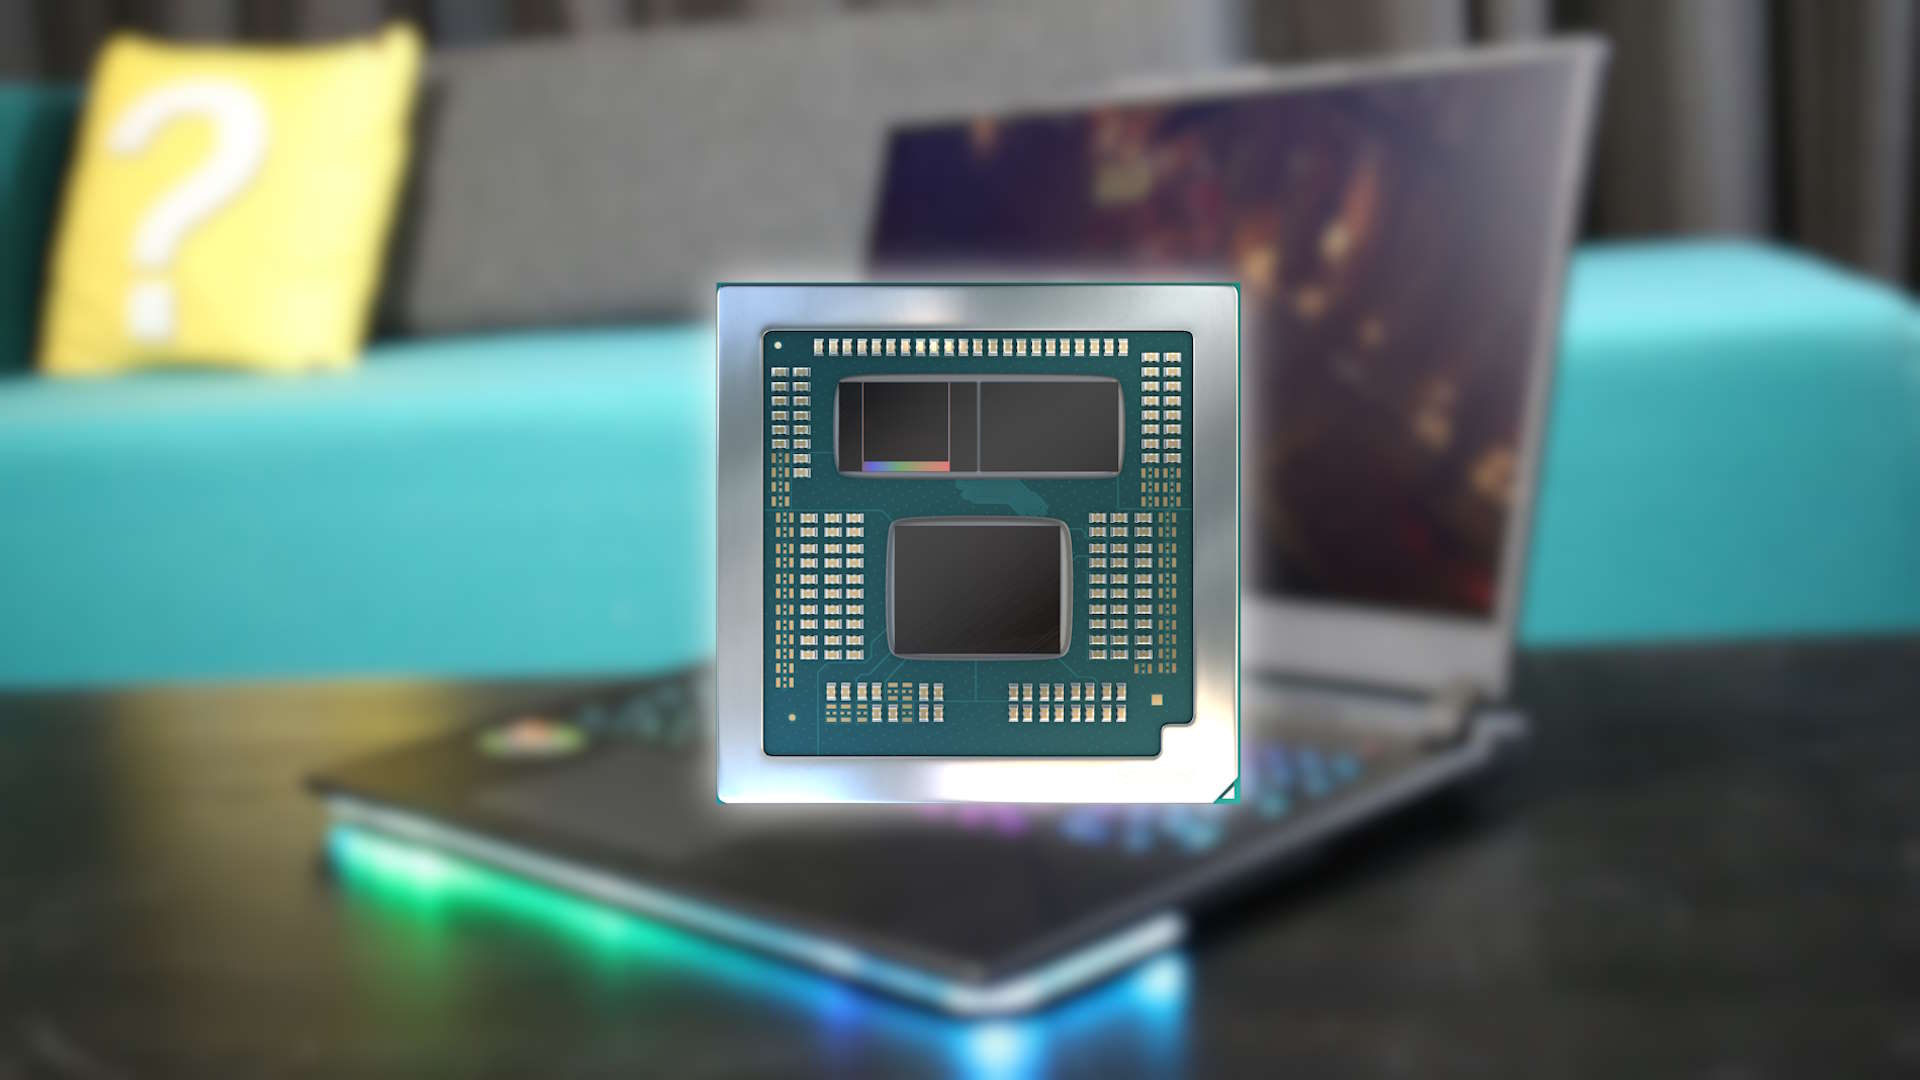  AMD Ryzen 9 7945HX3D hands-on testing: So, I guess AMD just makes all the best mobile chips now 